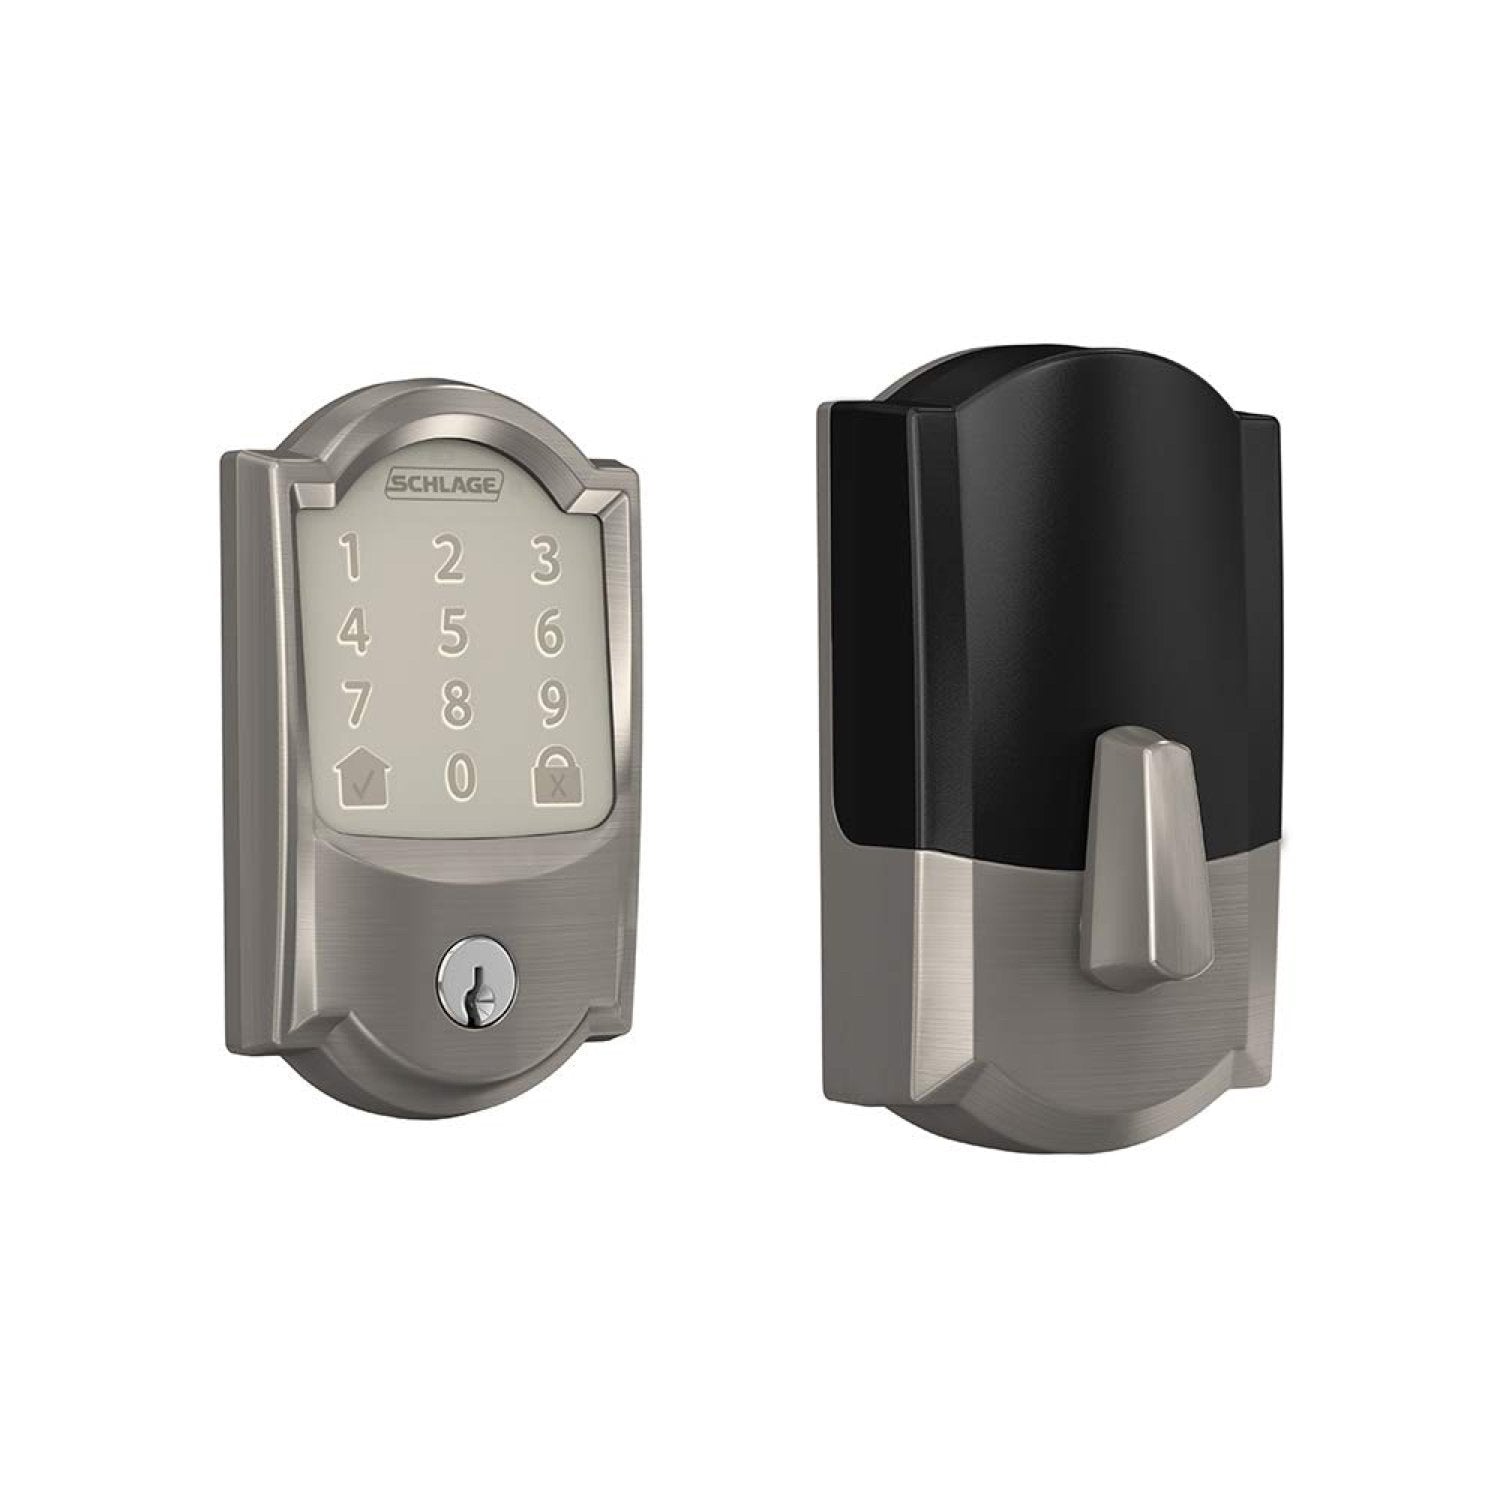 Schlage Encode Smart WiFi Deadbolt with Camelot Trim (for Works with Ring Video Doorbells and Cameras) - Satin Nickel